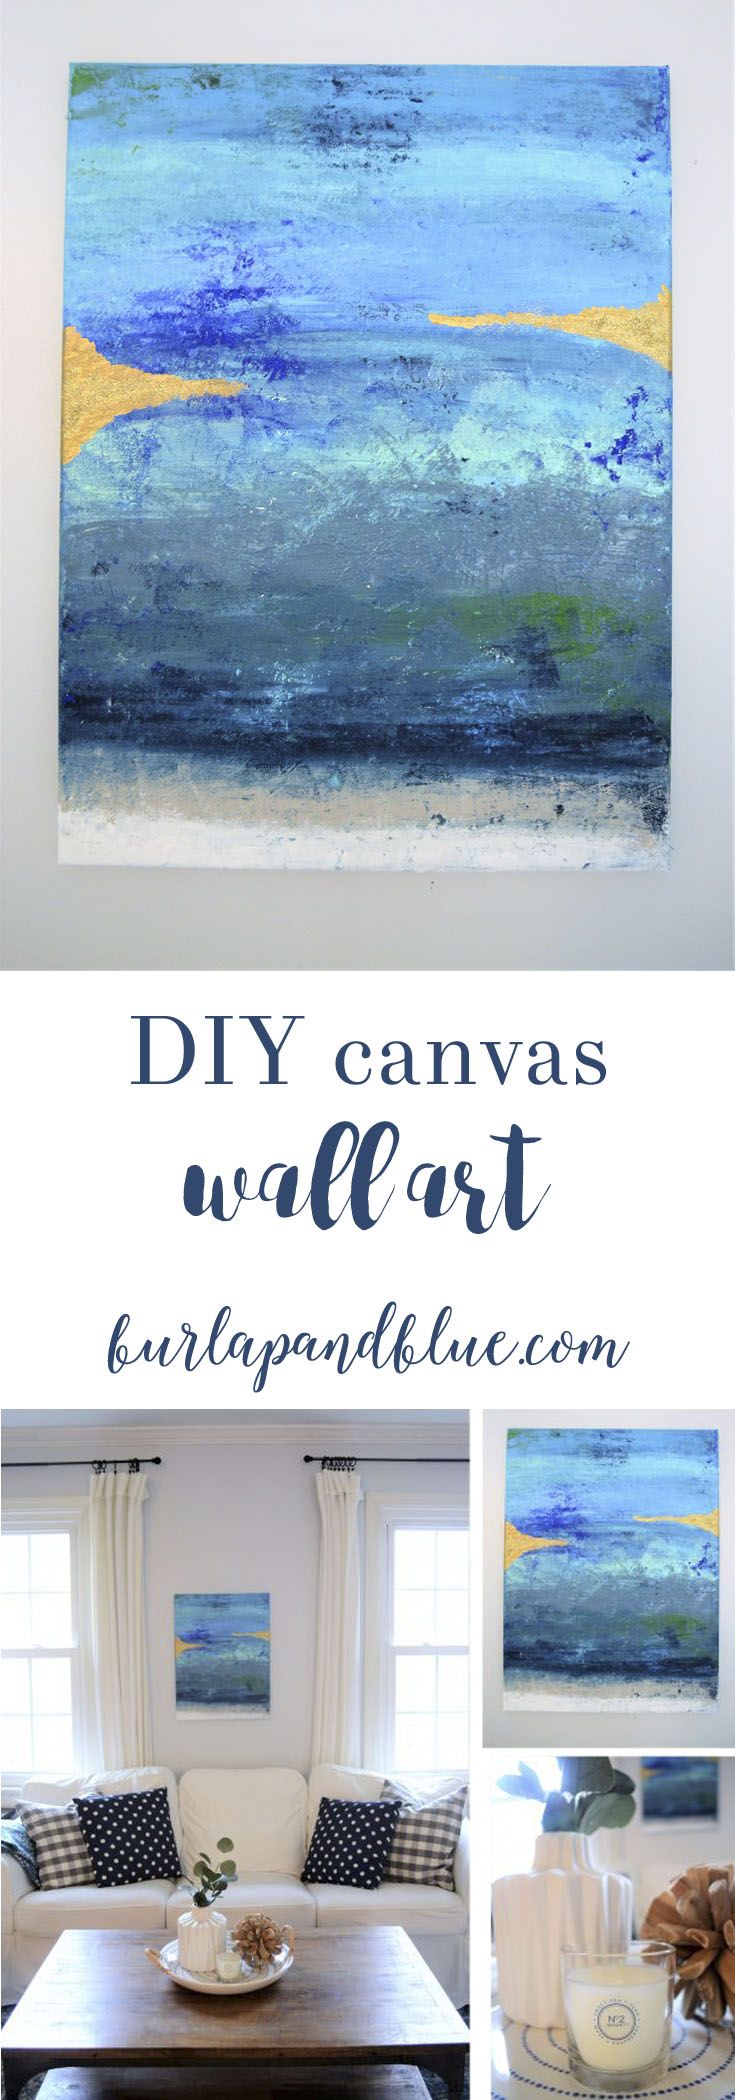 Easy DIY wall art tutorial! This was made in under an hour! Come see how to make...